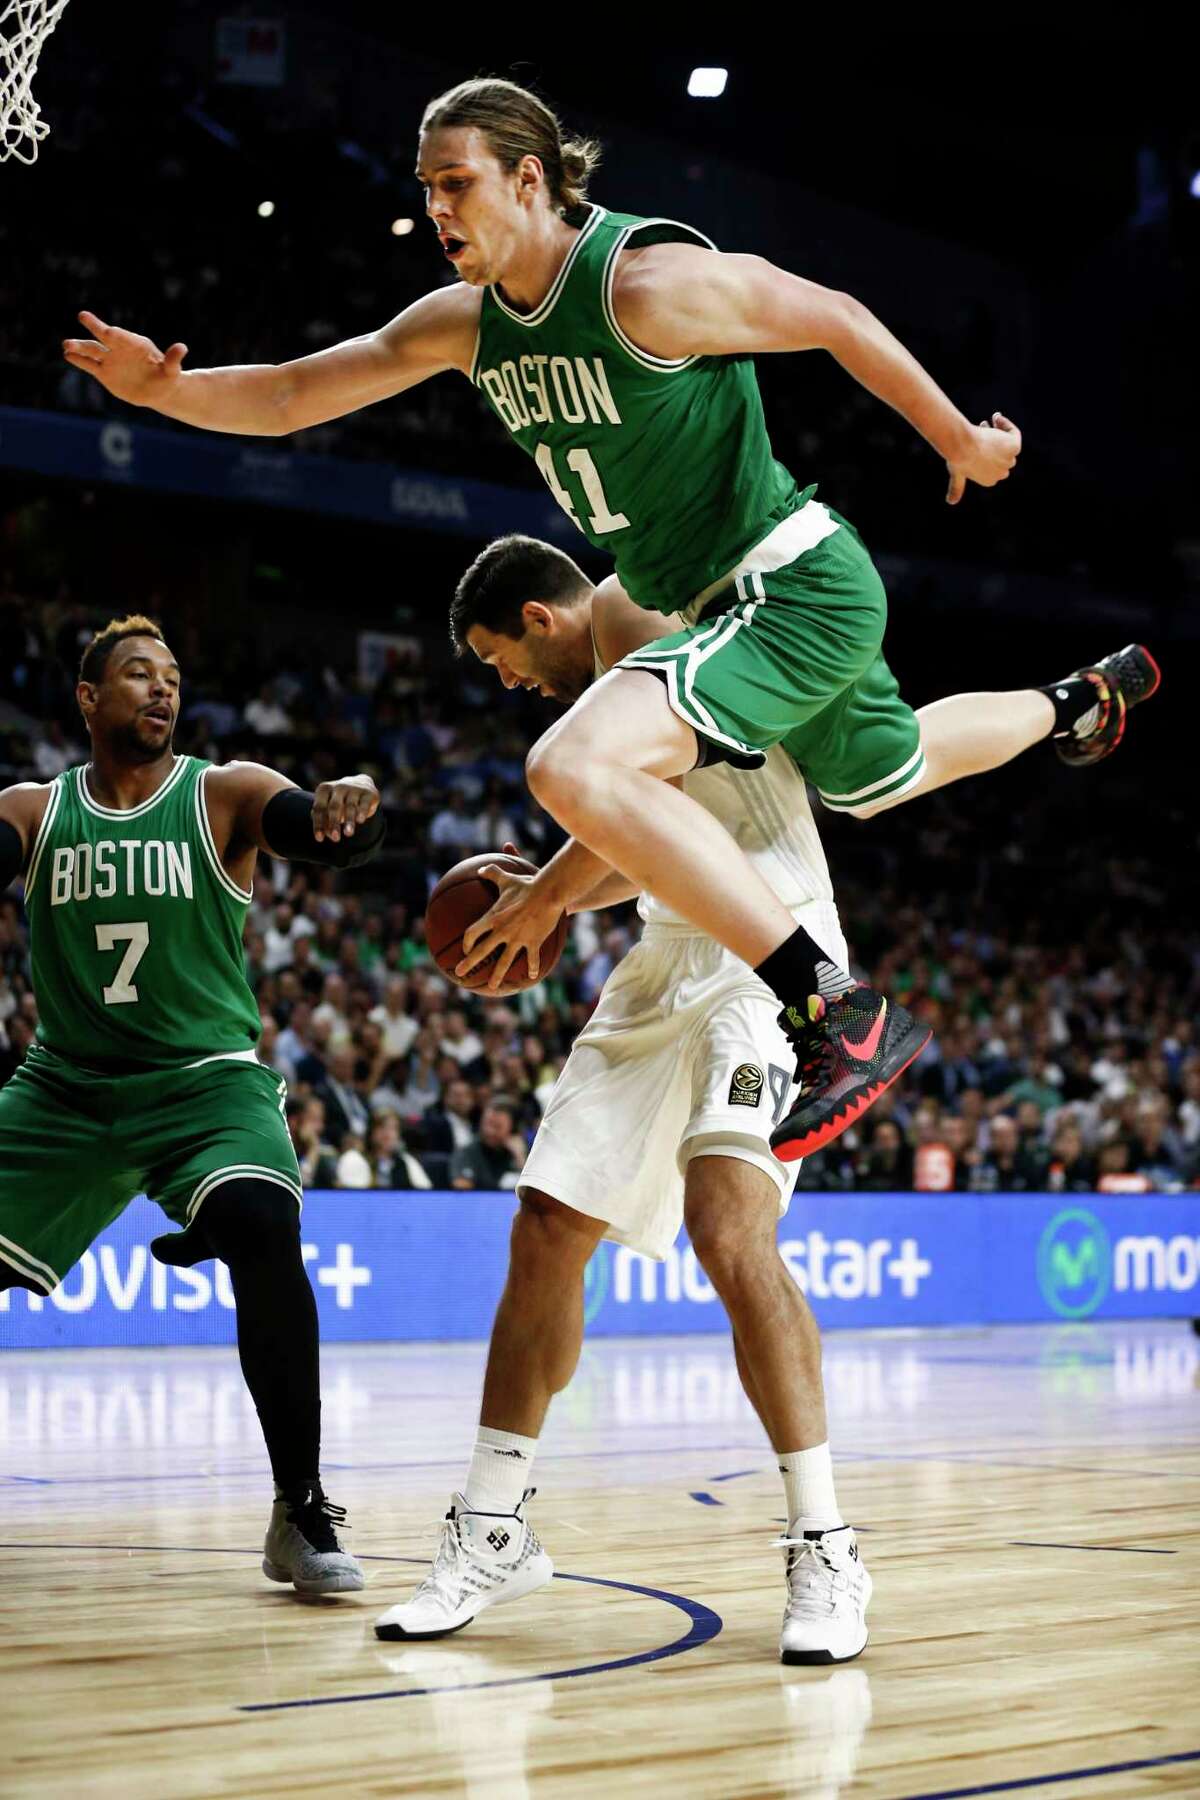 The Boston Celtics’ Kelly Olynyk, top, falls over Real Madrid’s Felipe Reyesd during Thursday’s game against Real Madrid at the Barclaycard Centre sport arena in Madrid, Spain.